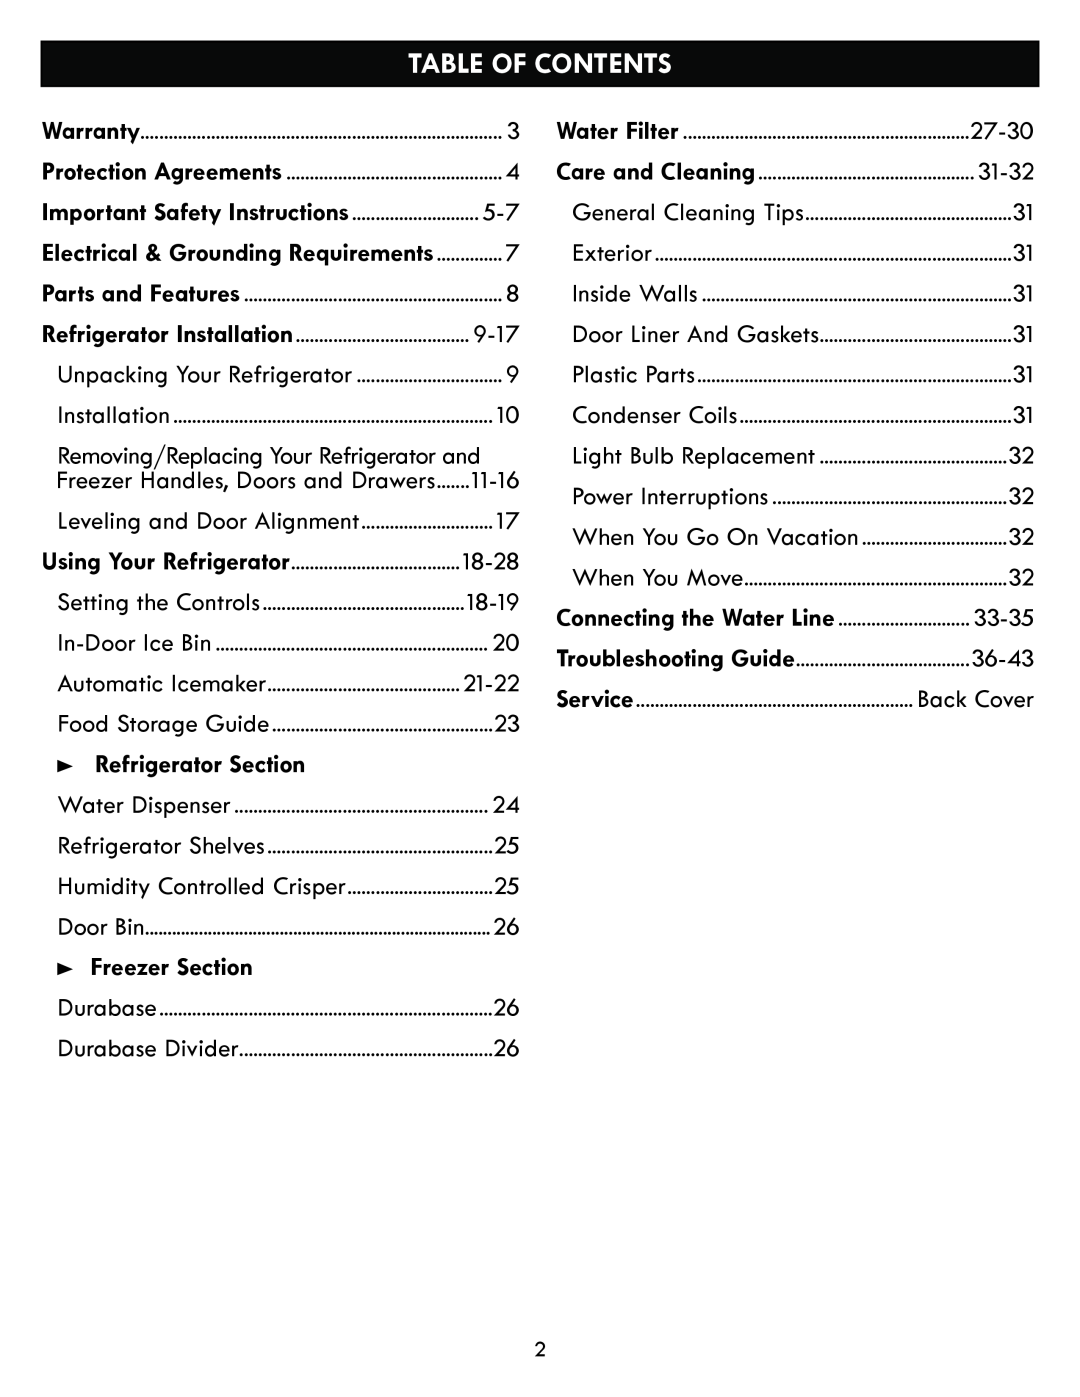 Kenmore kenmore manual Table Of Contents, Refrigerator Section, Freezer Section 